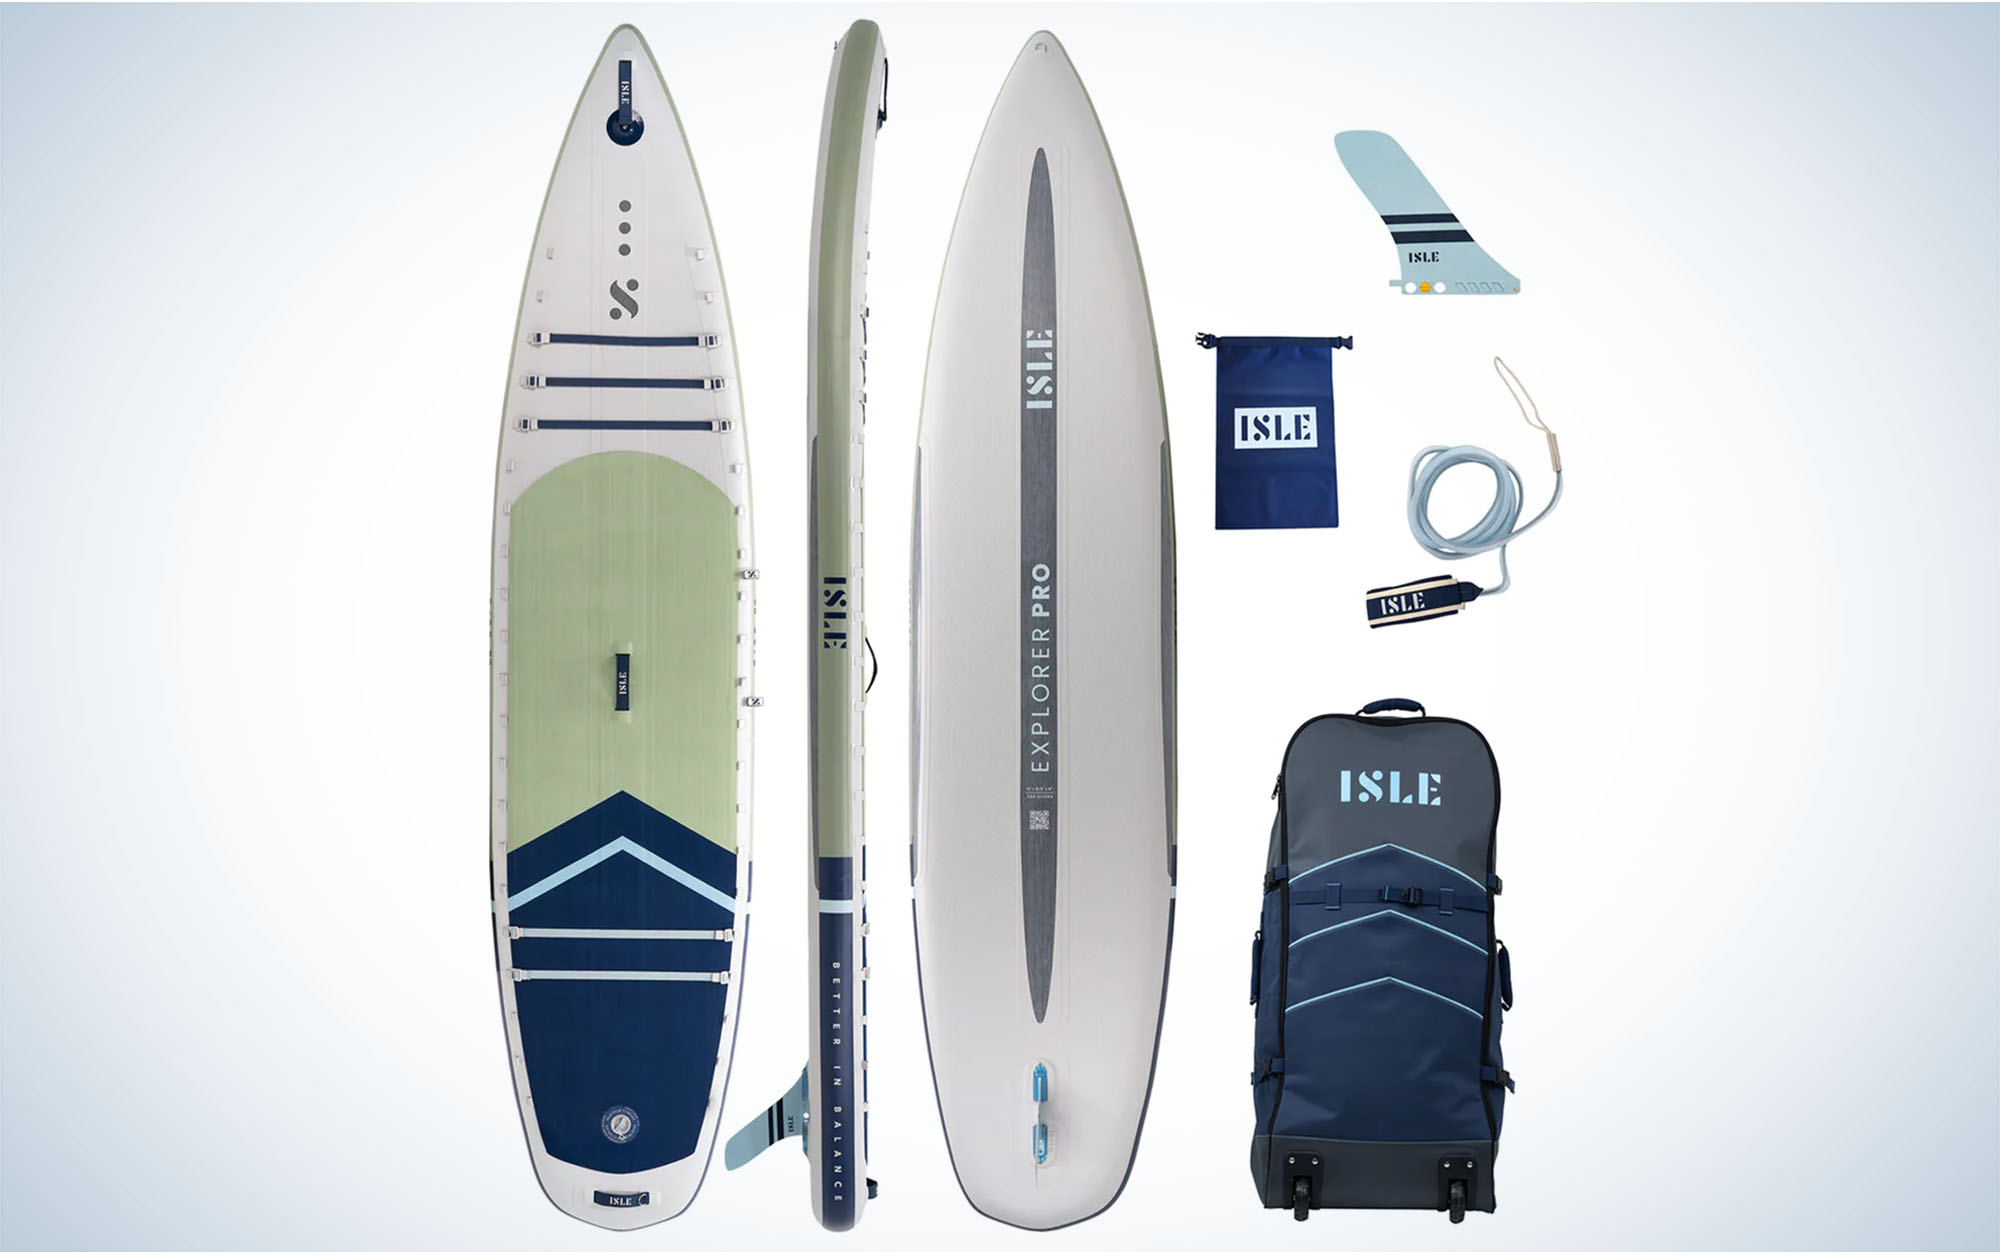 The Isle Explorer Pro is one of the best inflatable paddle boards.